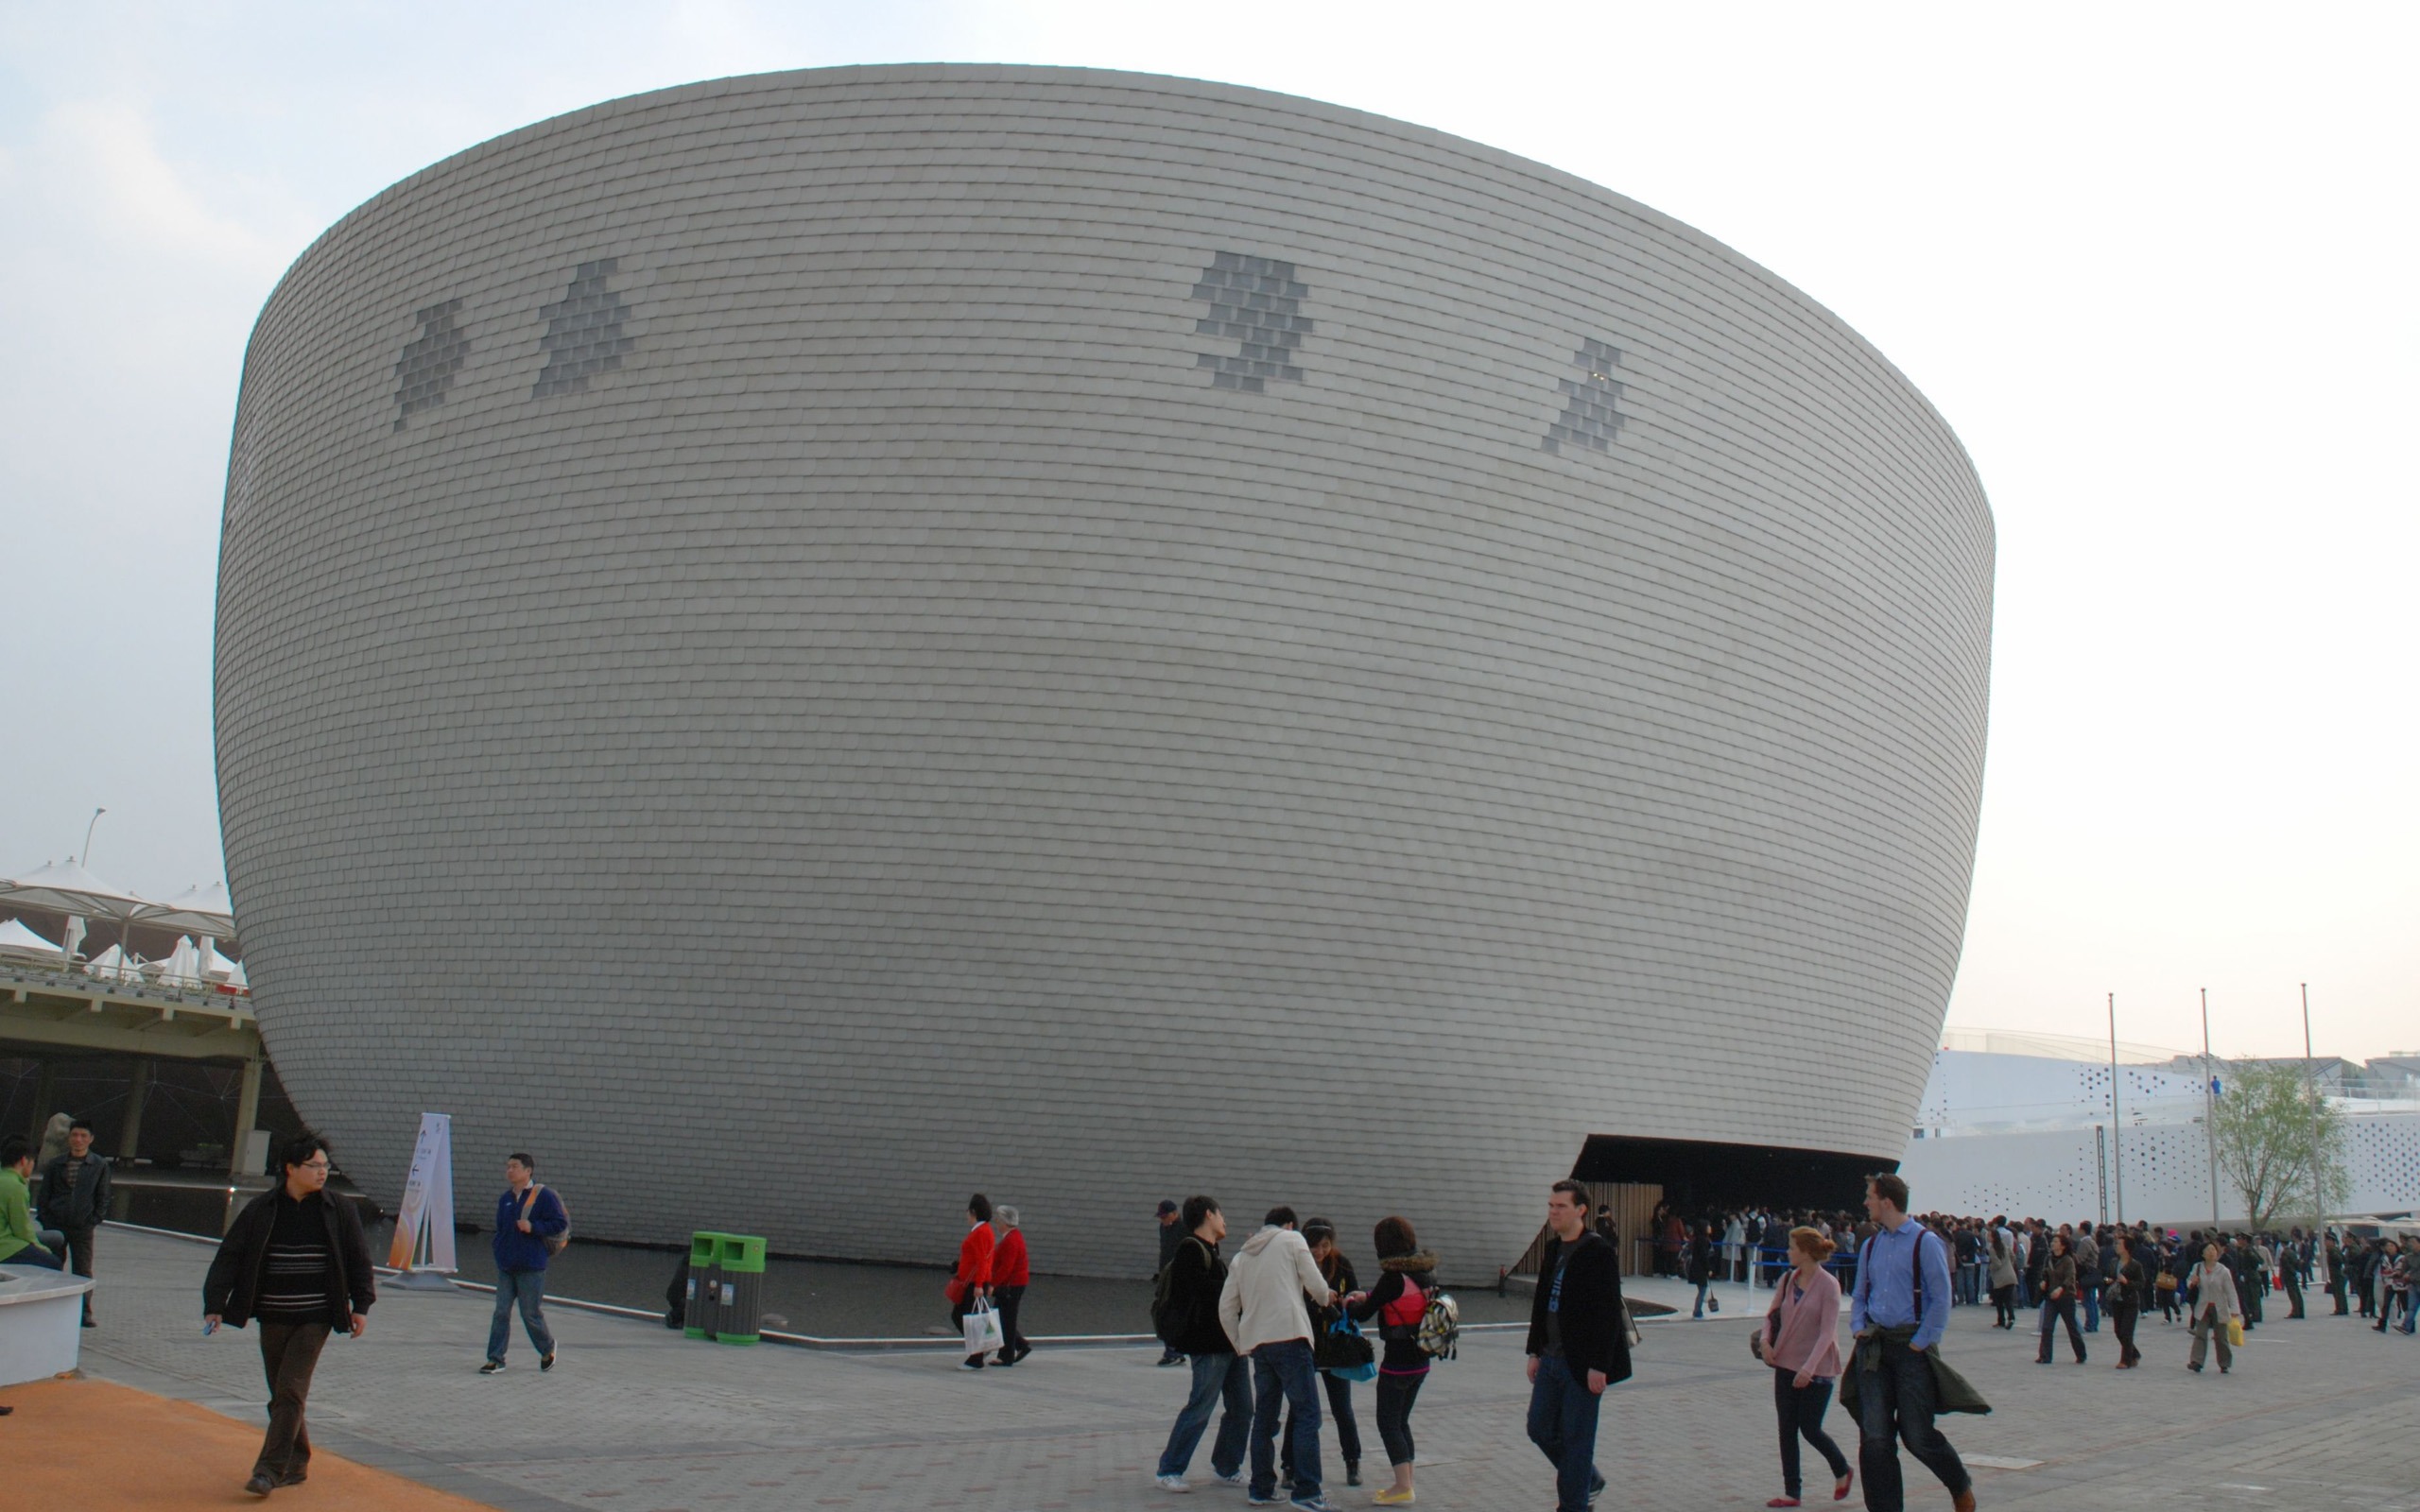 Commissioning of the 2010 Shanghai World Expo (studious works) #24 - 2560x1600